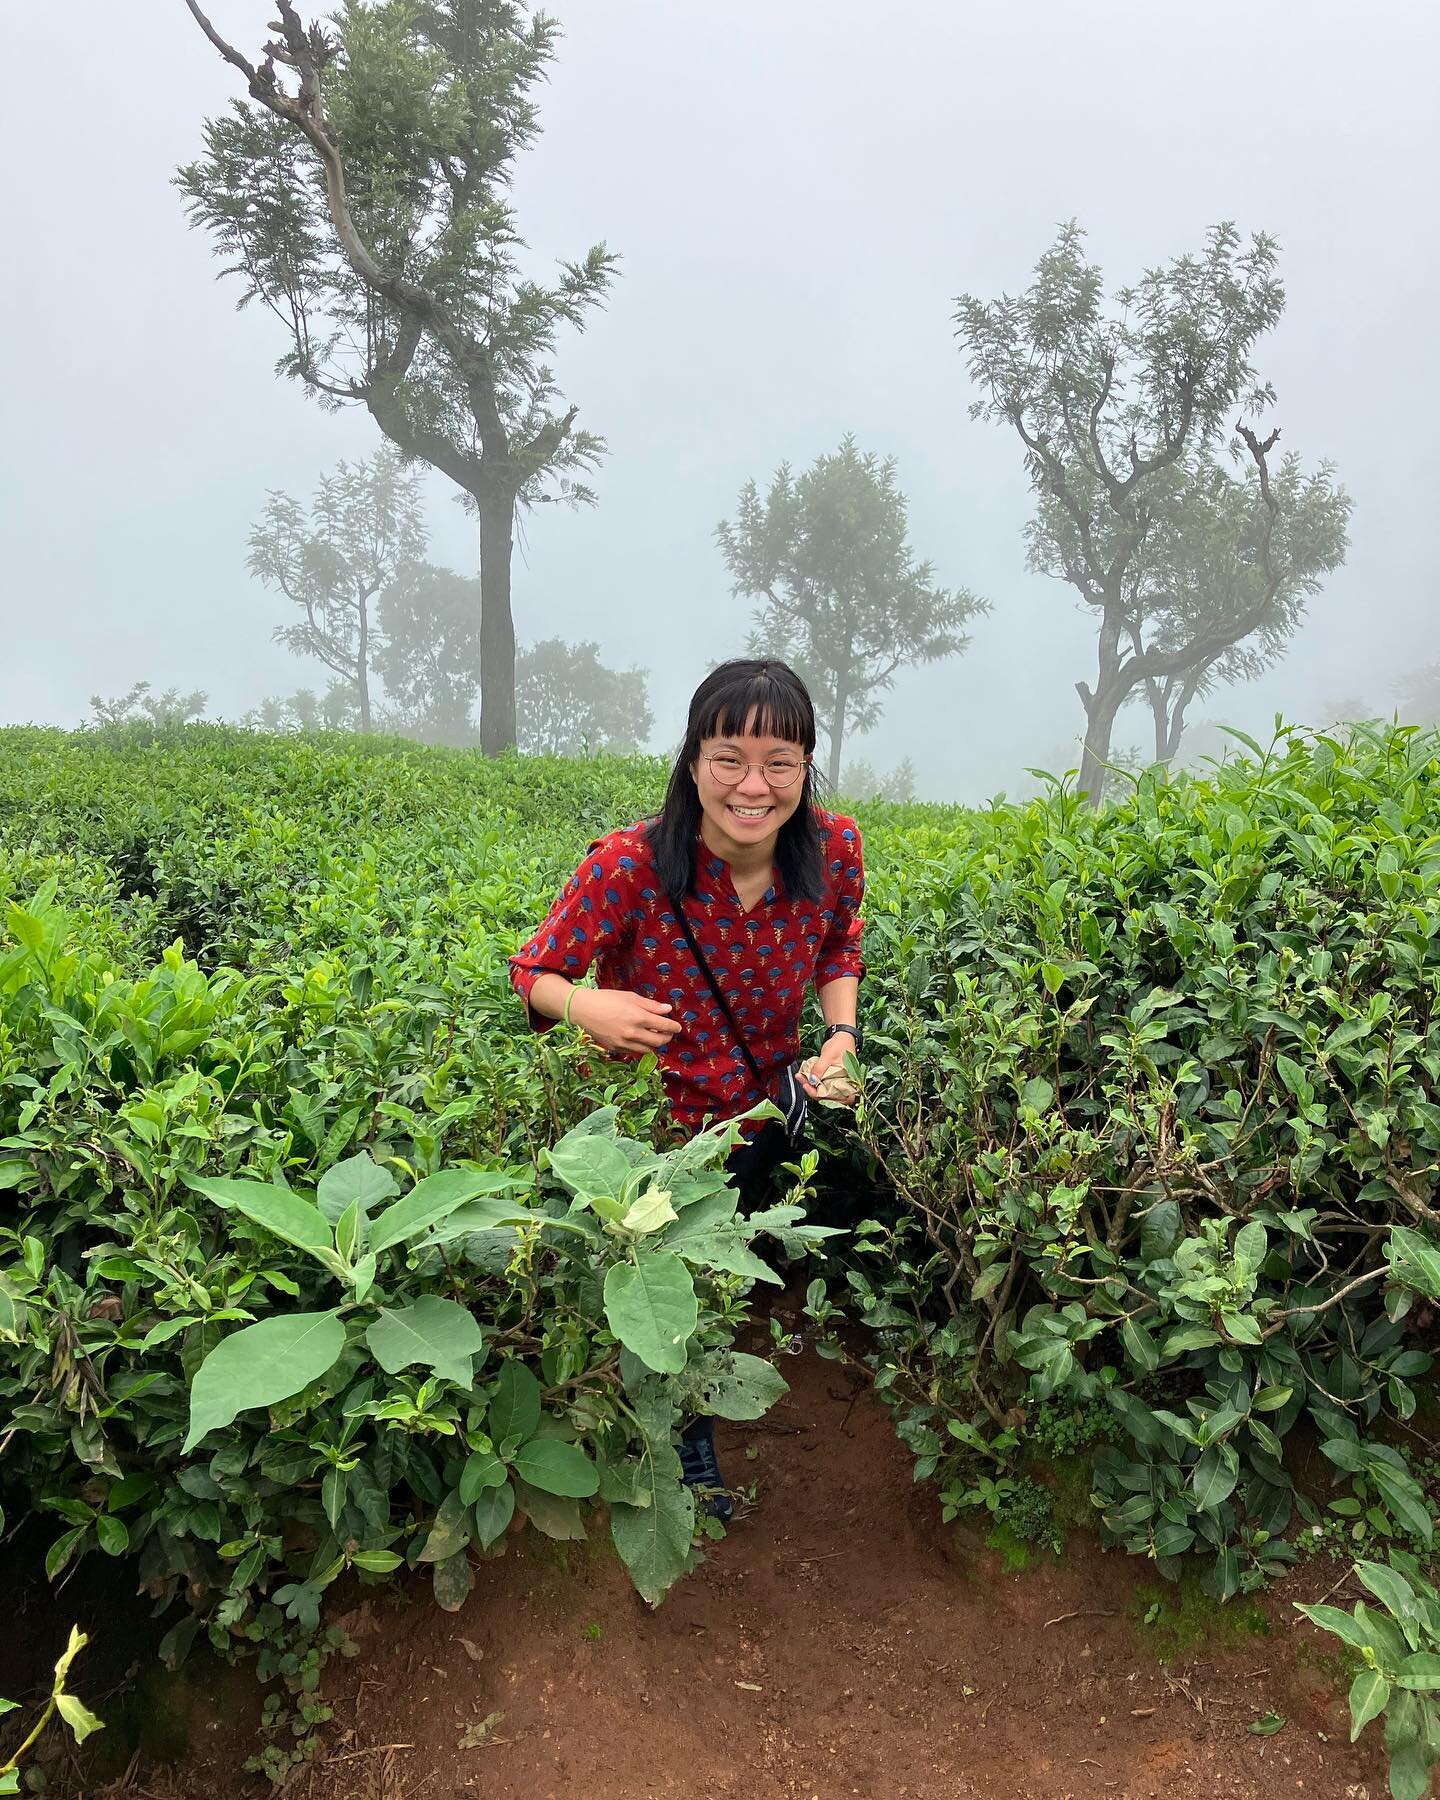 Hello Shansi Community! 

Madeleine here, posting as one of the Keystone fellows currently in India. The last time I made an appearance on Shansi&rsquo;s instagram, I was at home in Maryland trying to navigate the disappointment and challenge in a re